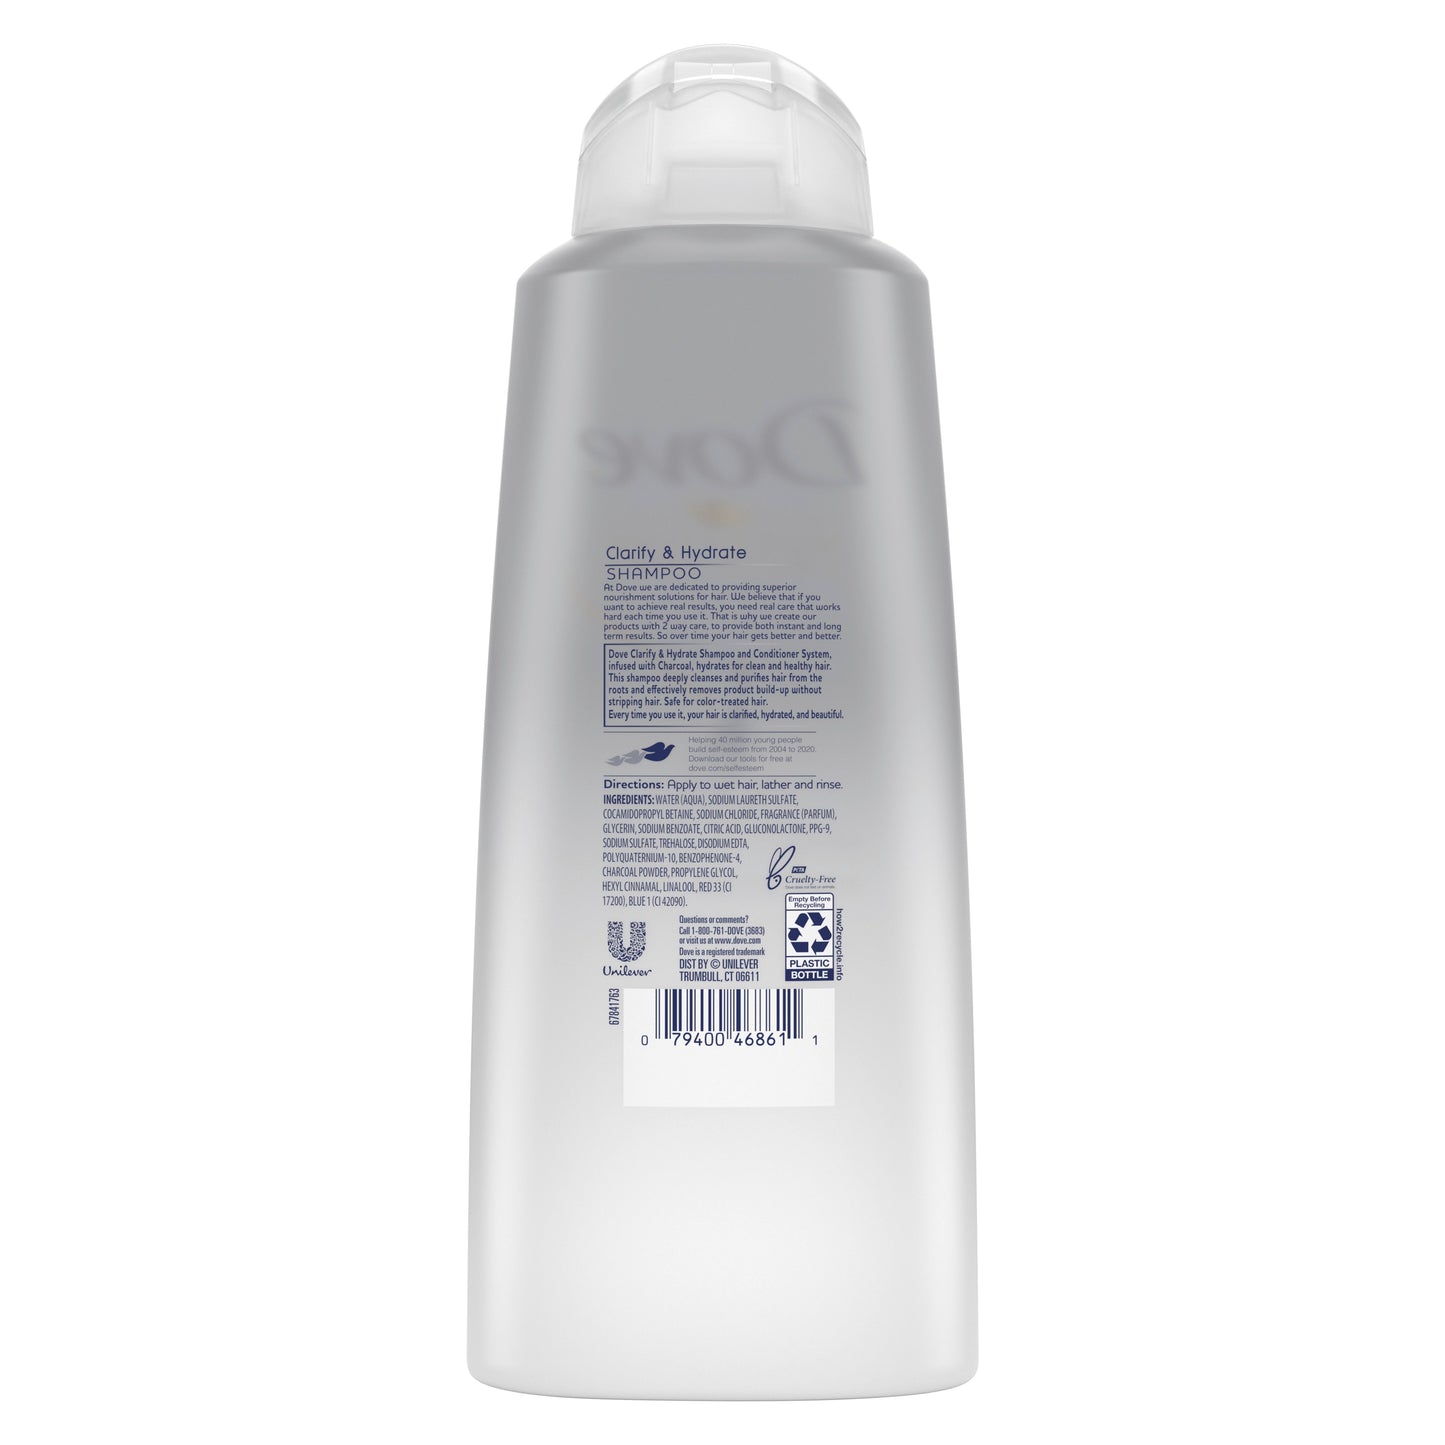 Dove Clarify & Hydrate Shampoo with Charcoal 20.4 oz "2-PACK"